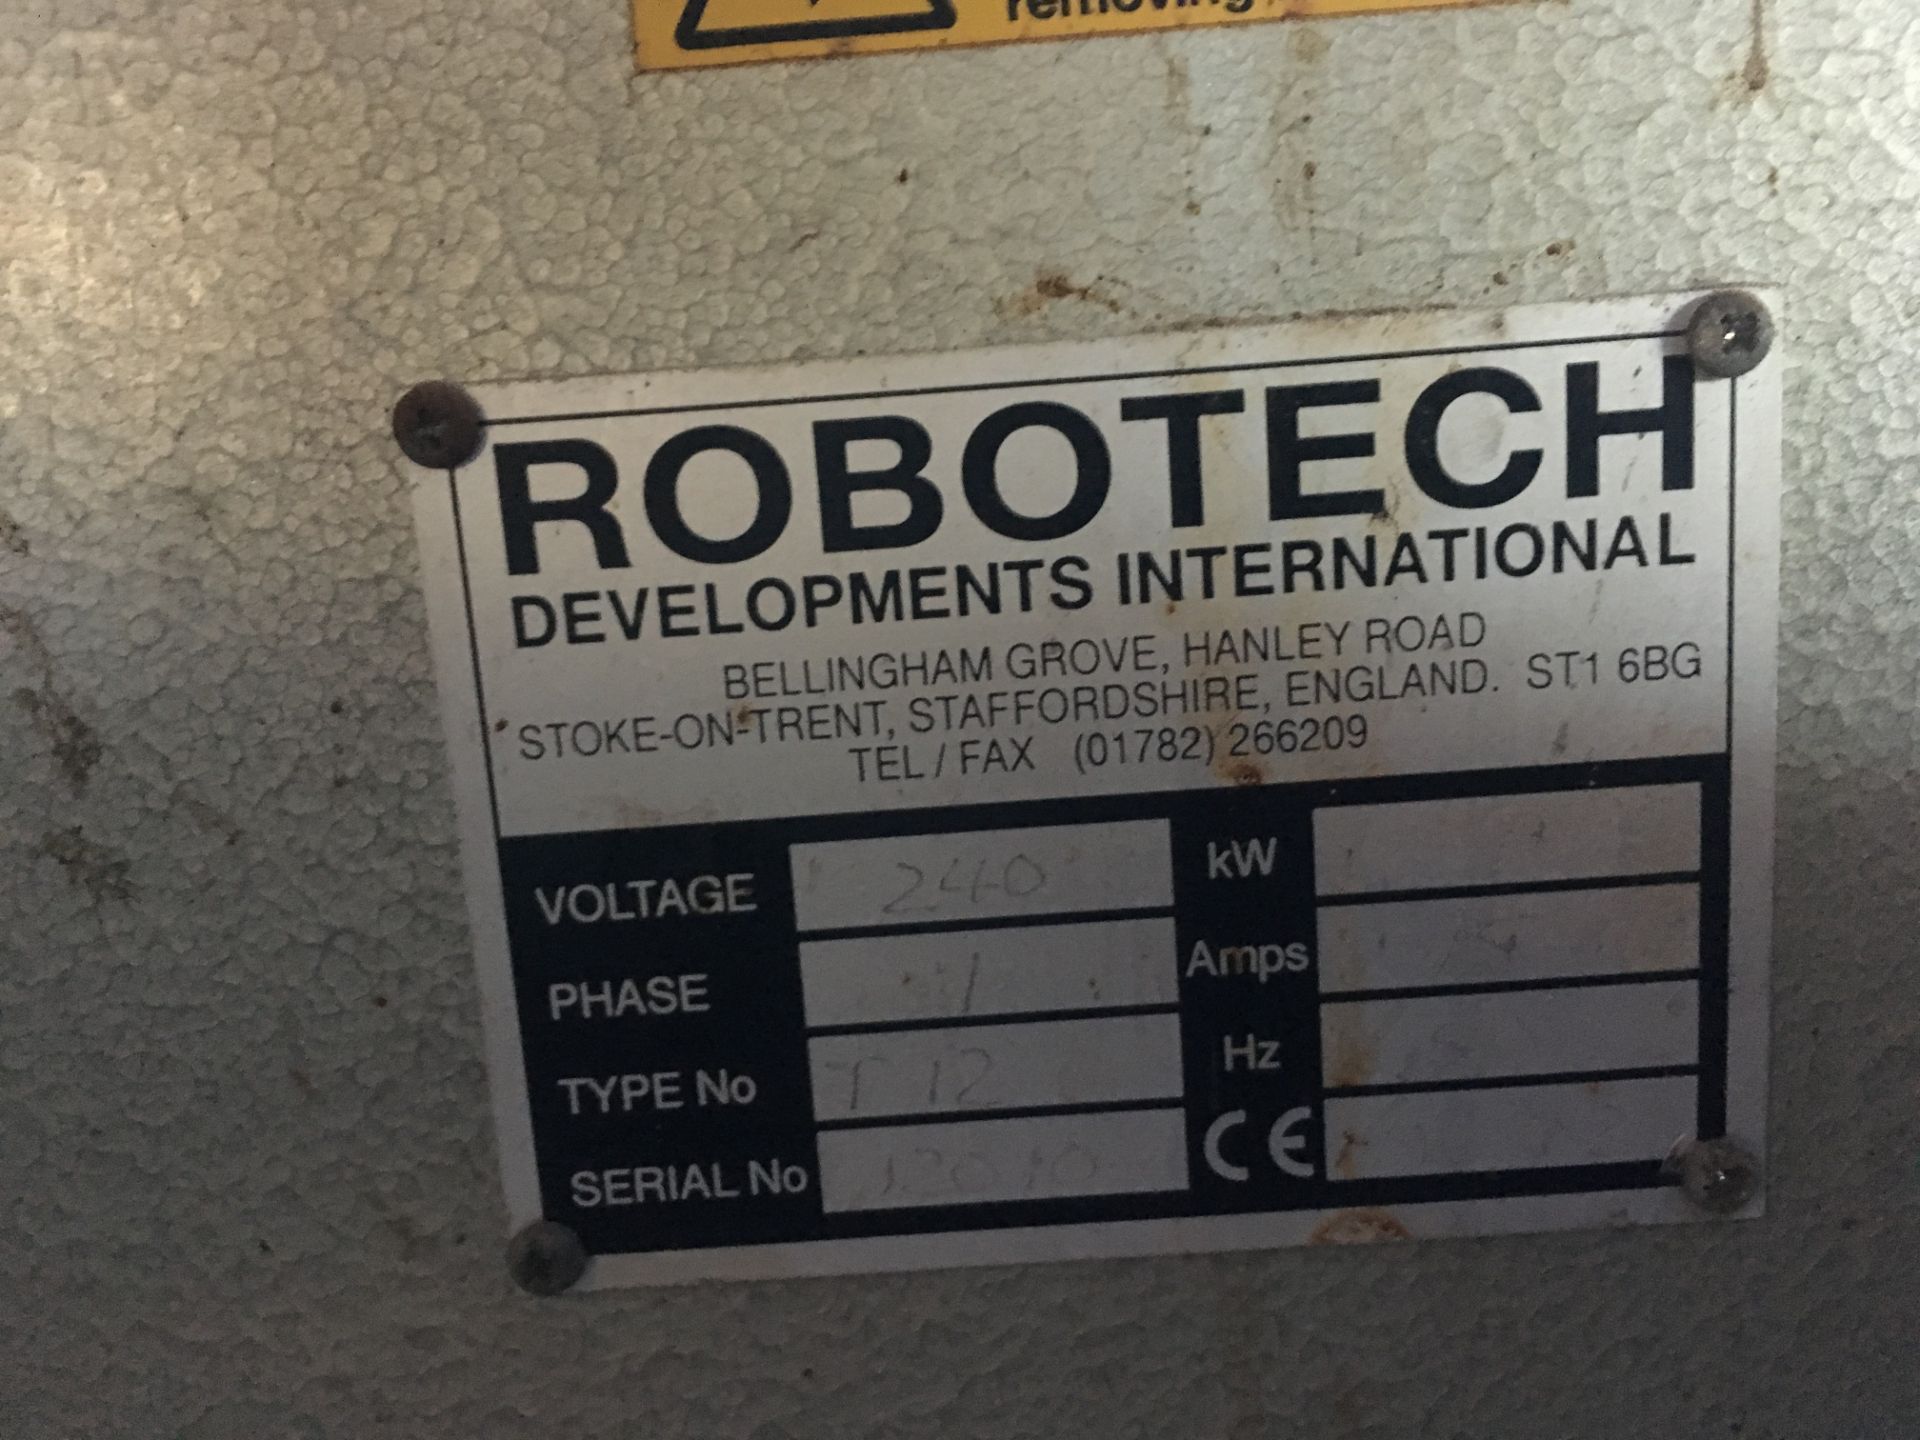 Robotech T12 floor standing electric burnout furnace, serial no: 120110 (2002) - Image 5 of 5